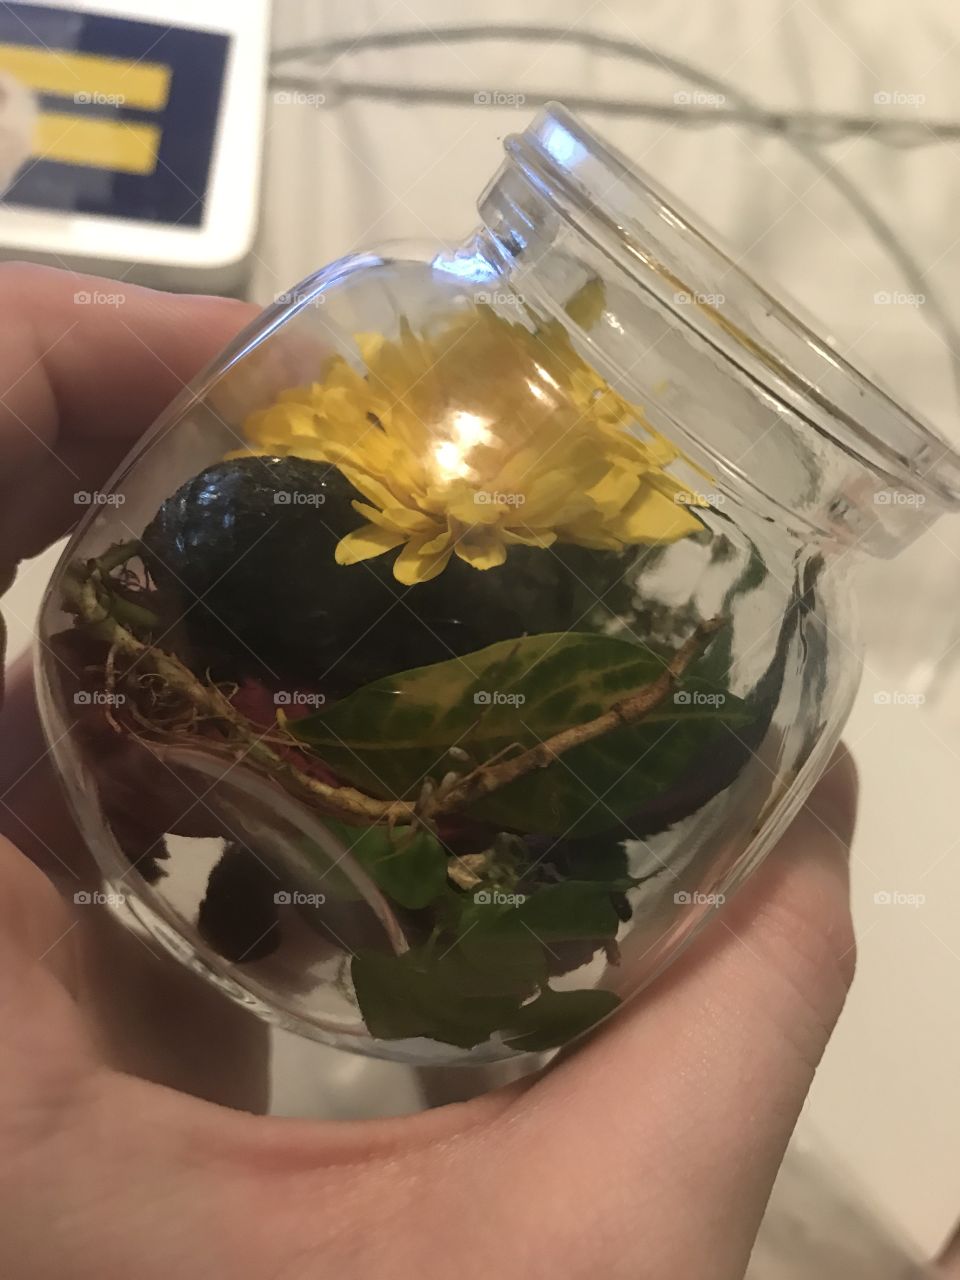 A glass jar full of plant life, leaves, and a single dandelion, with someone holding it